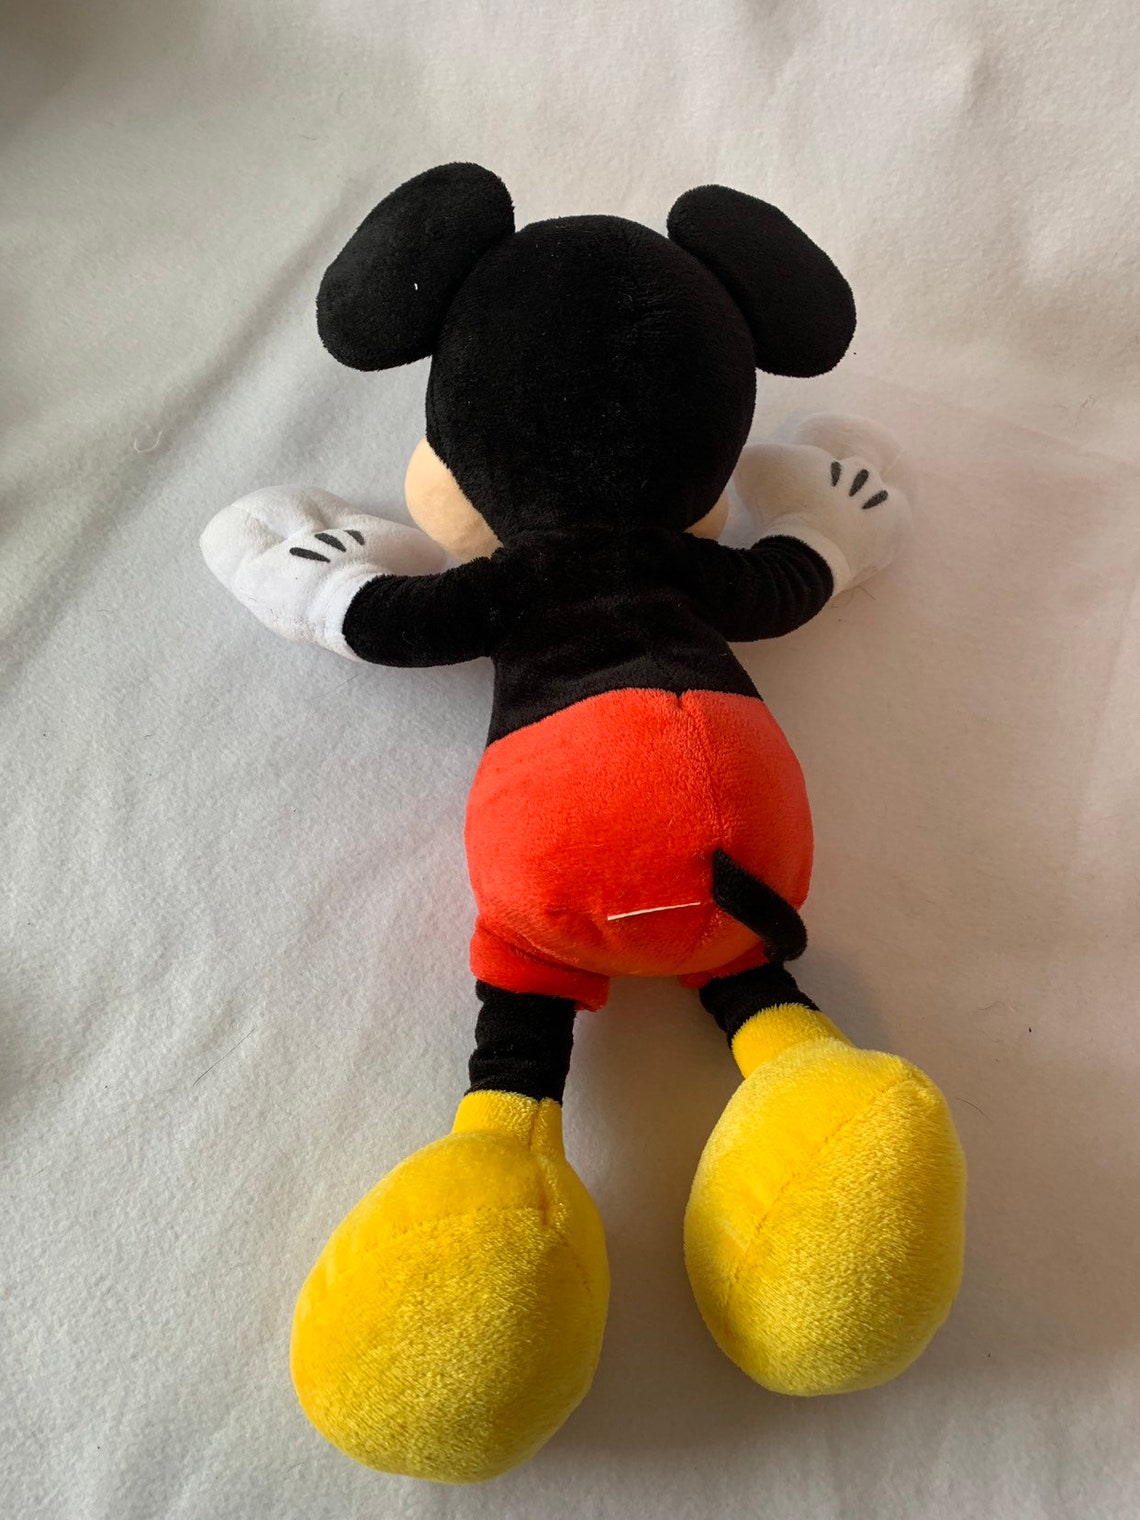 Weighted Stuffed Animal Mickey or Minnie Mouse Sensory Toy - Etsy